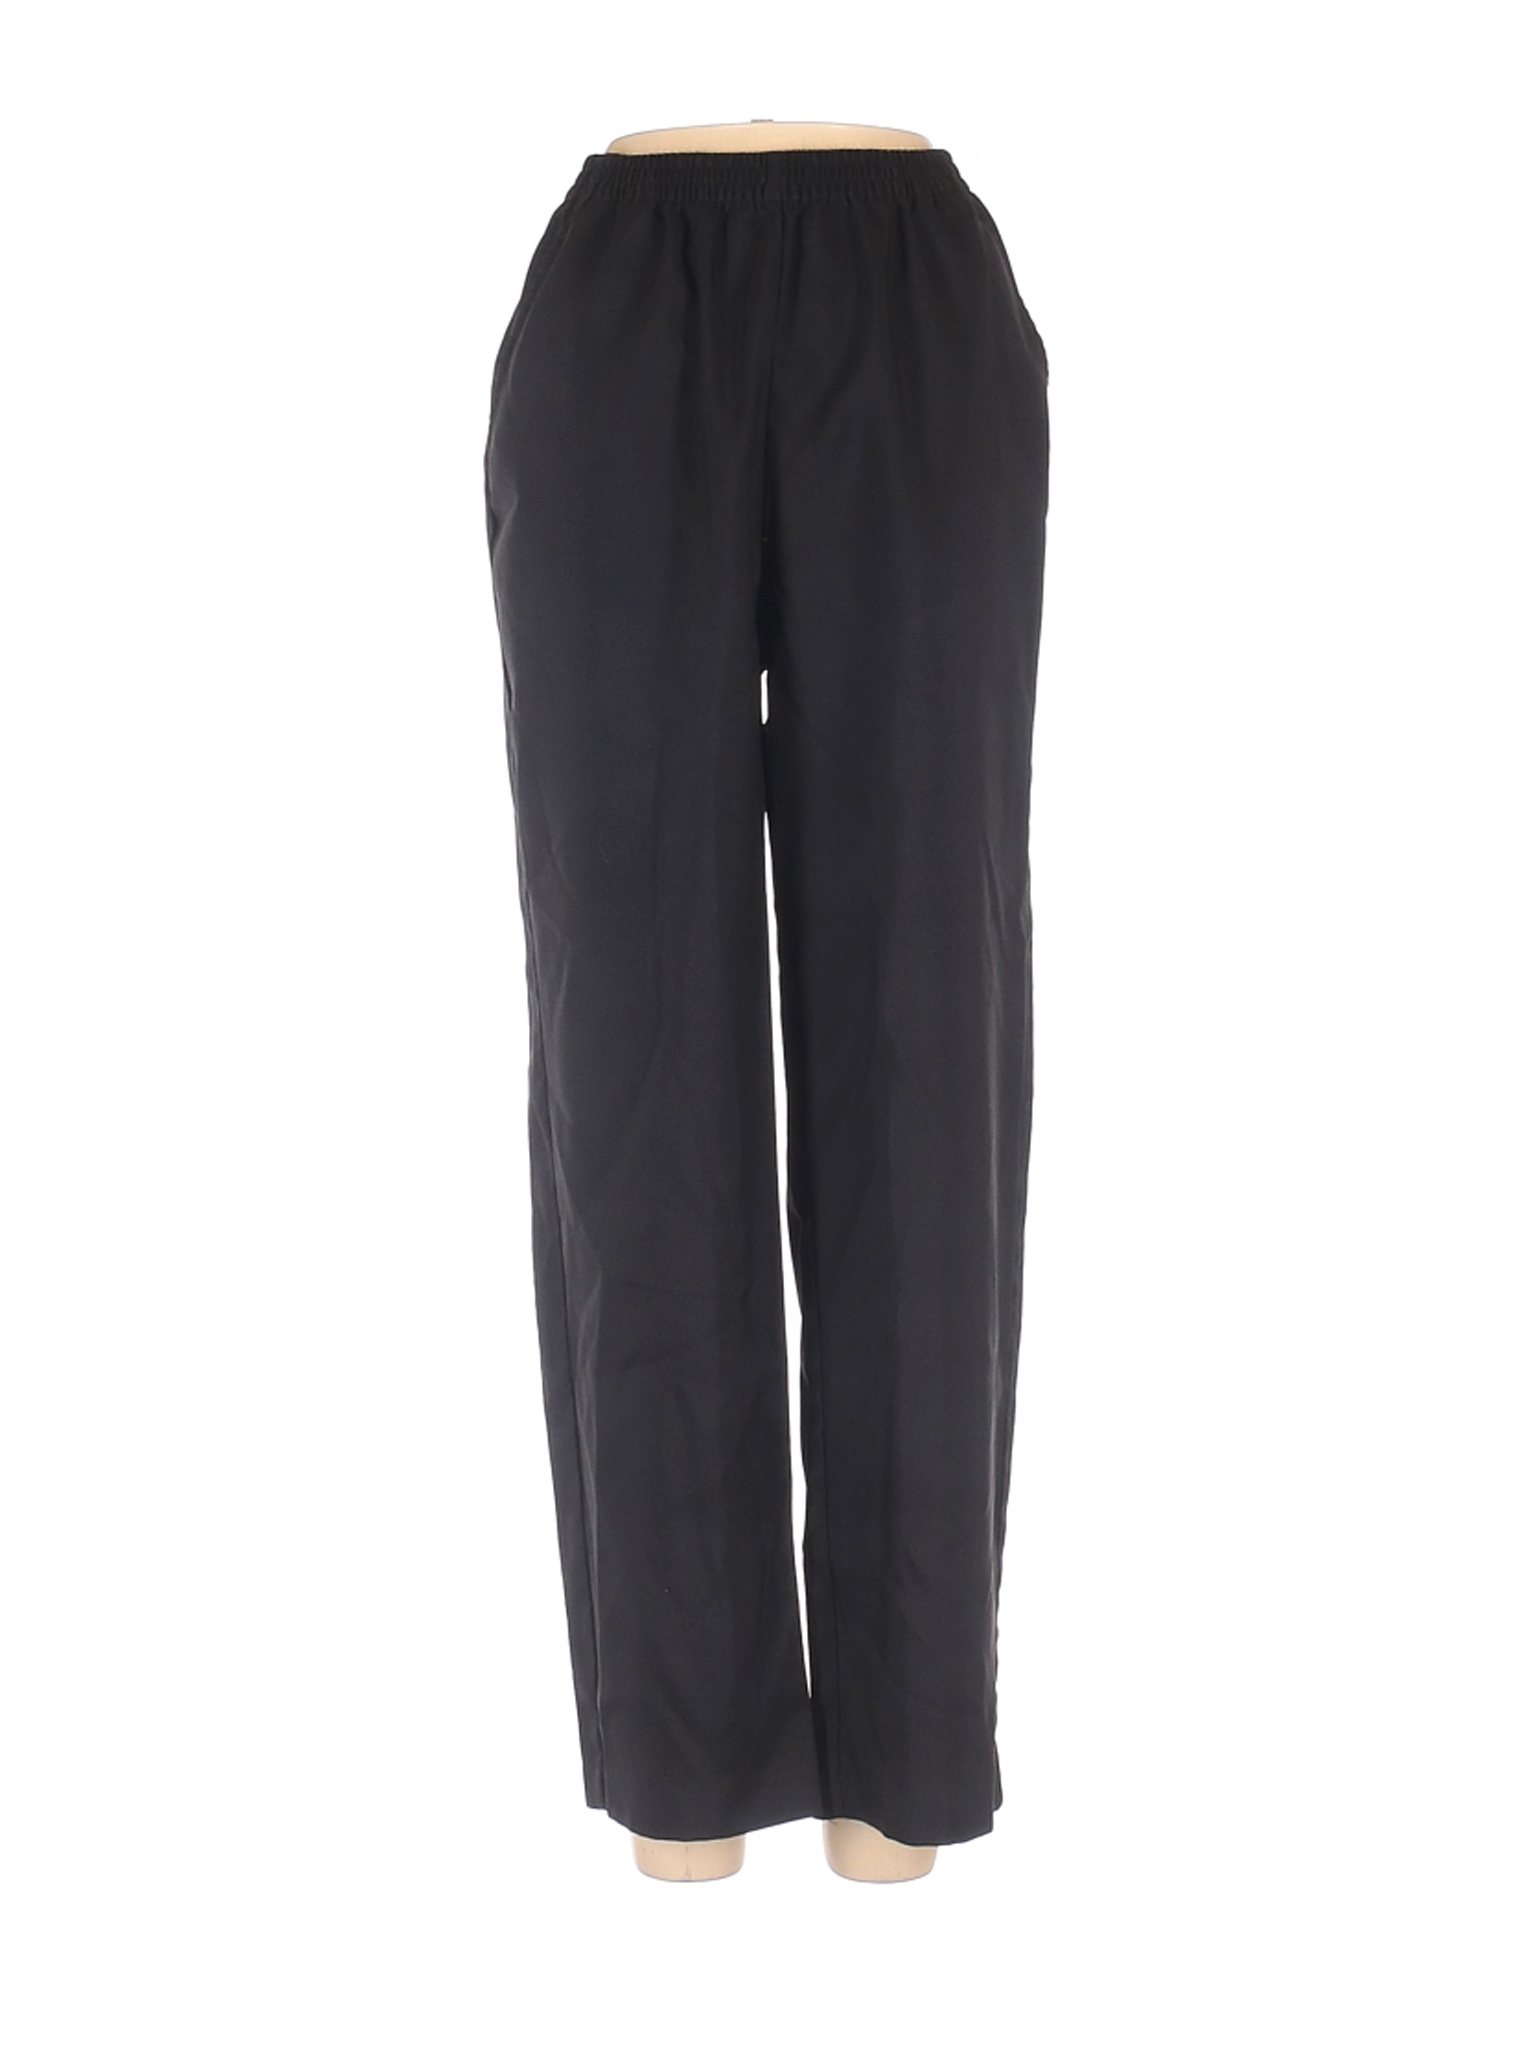 Blair 100% Polyester Solid Black Casual Pants Size 8 - 70% off | thredUP